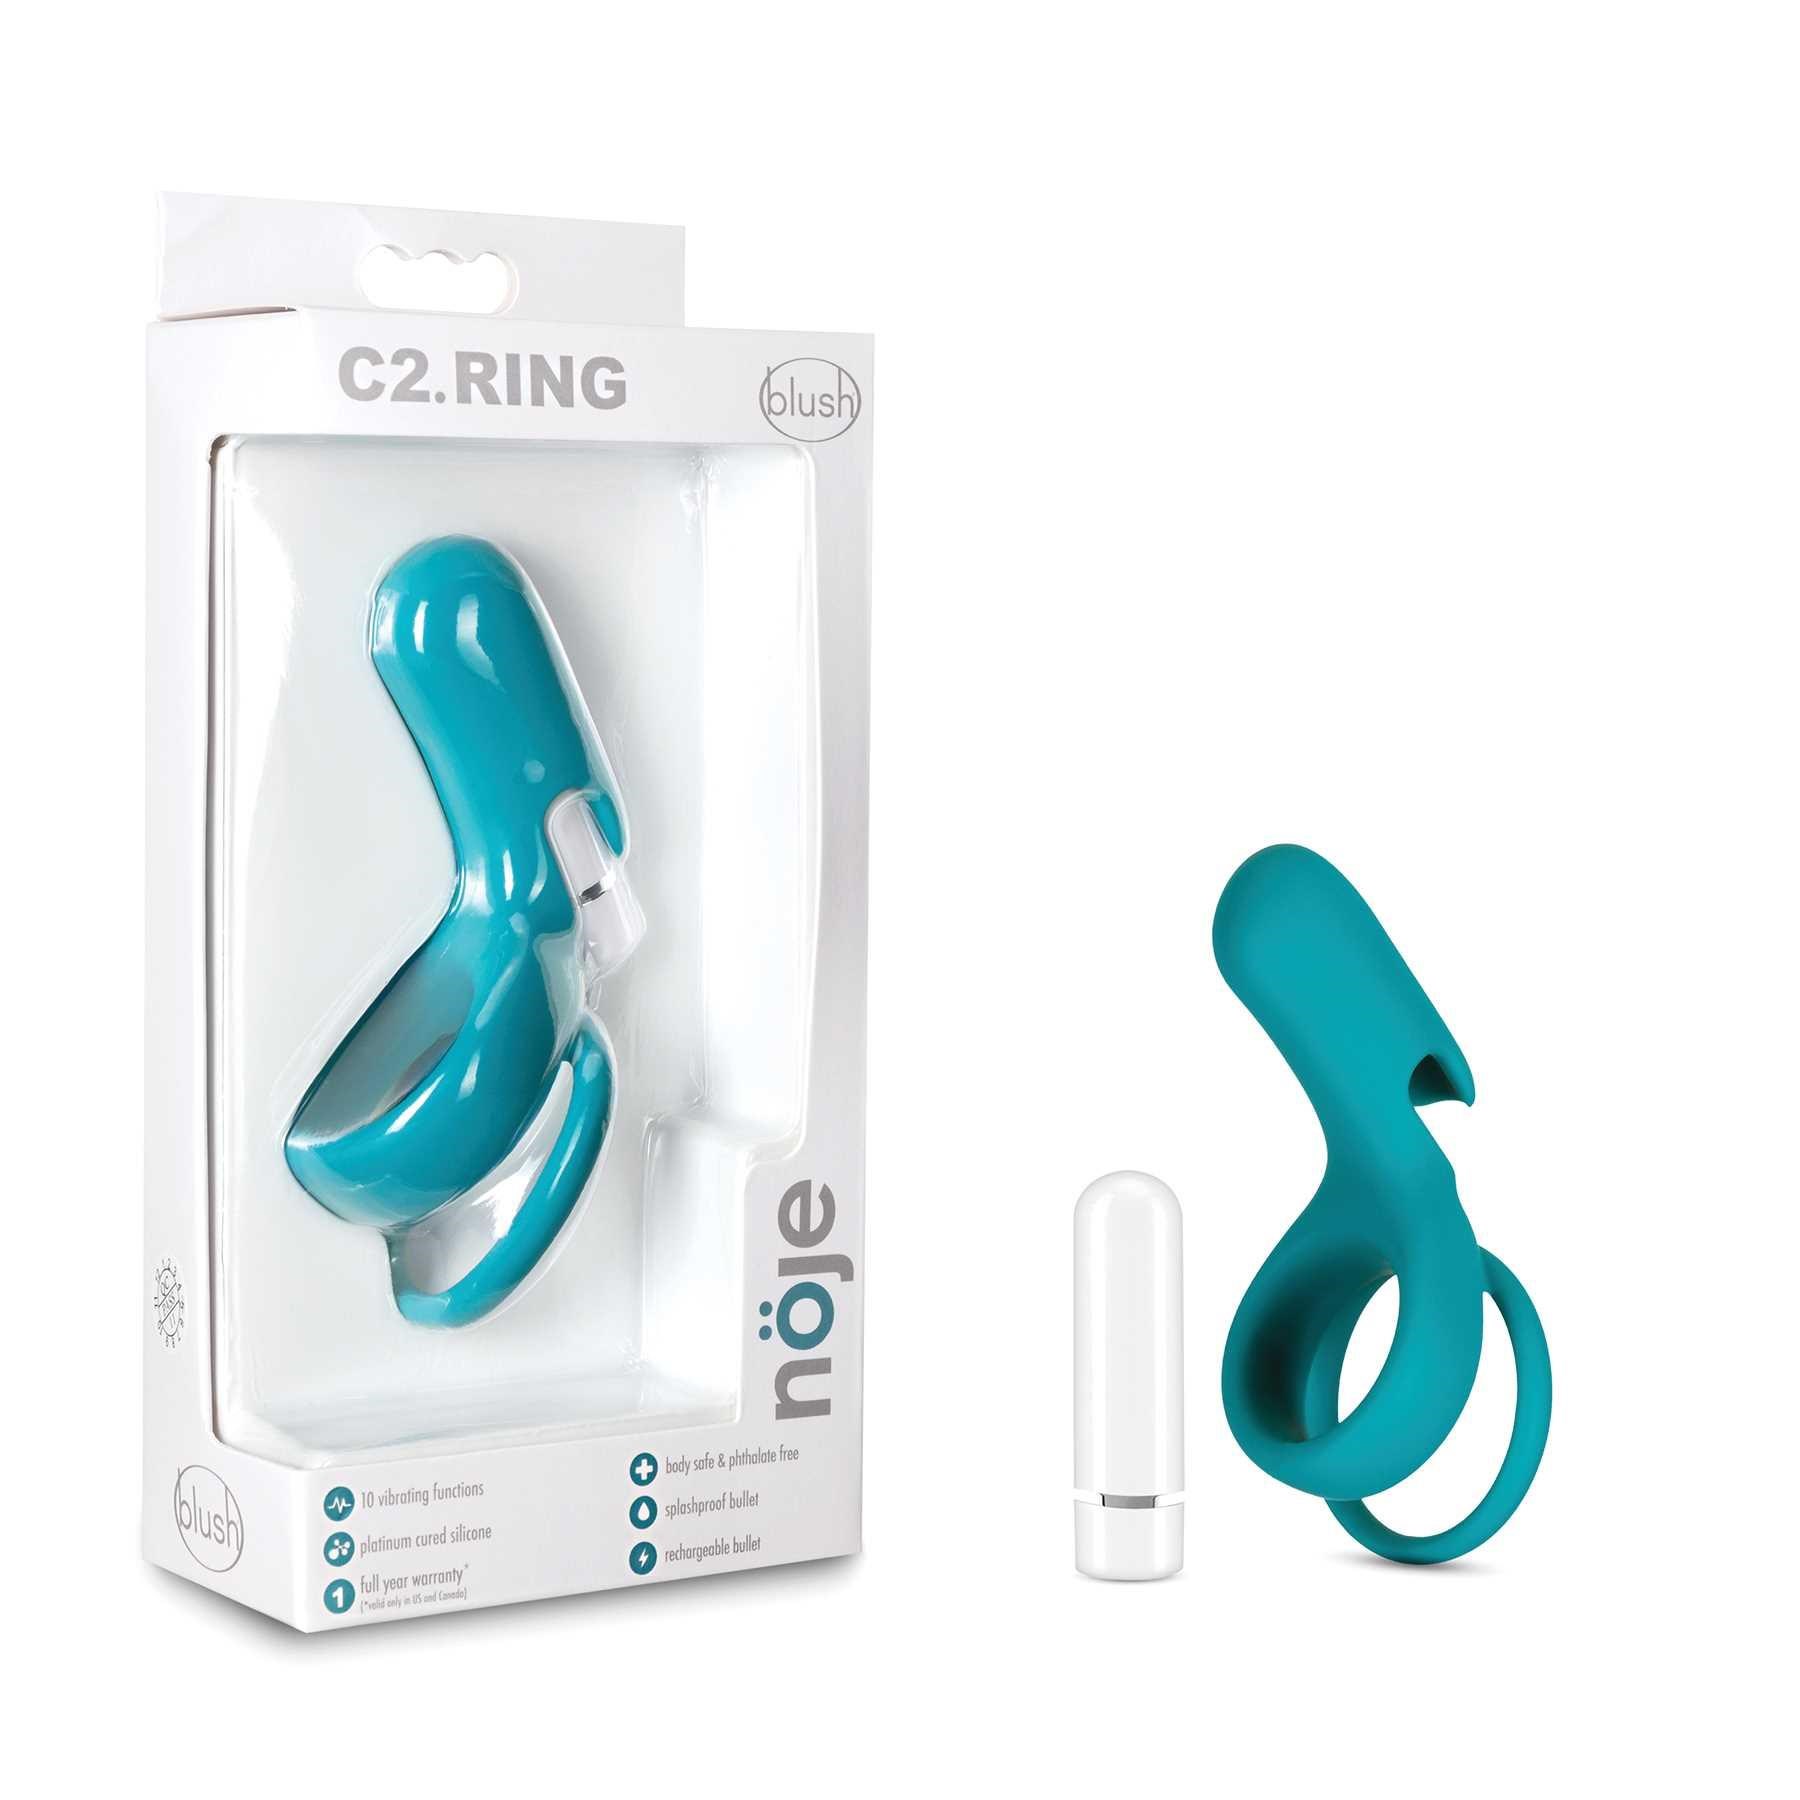 Noje C2 Ring with box packaging